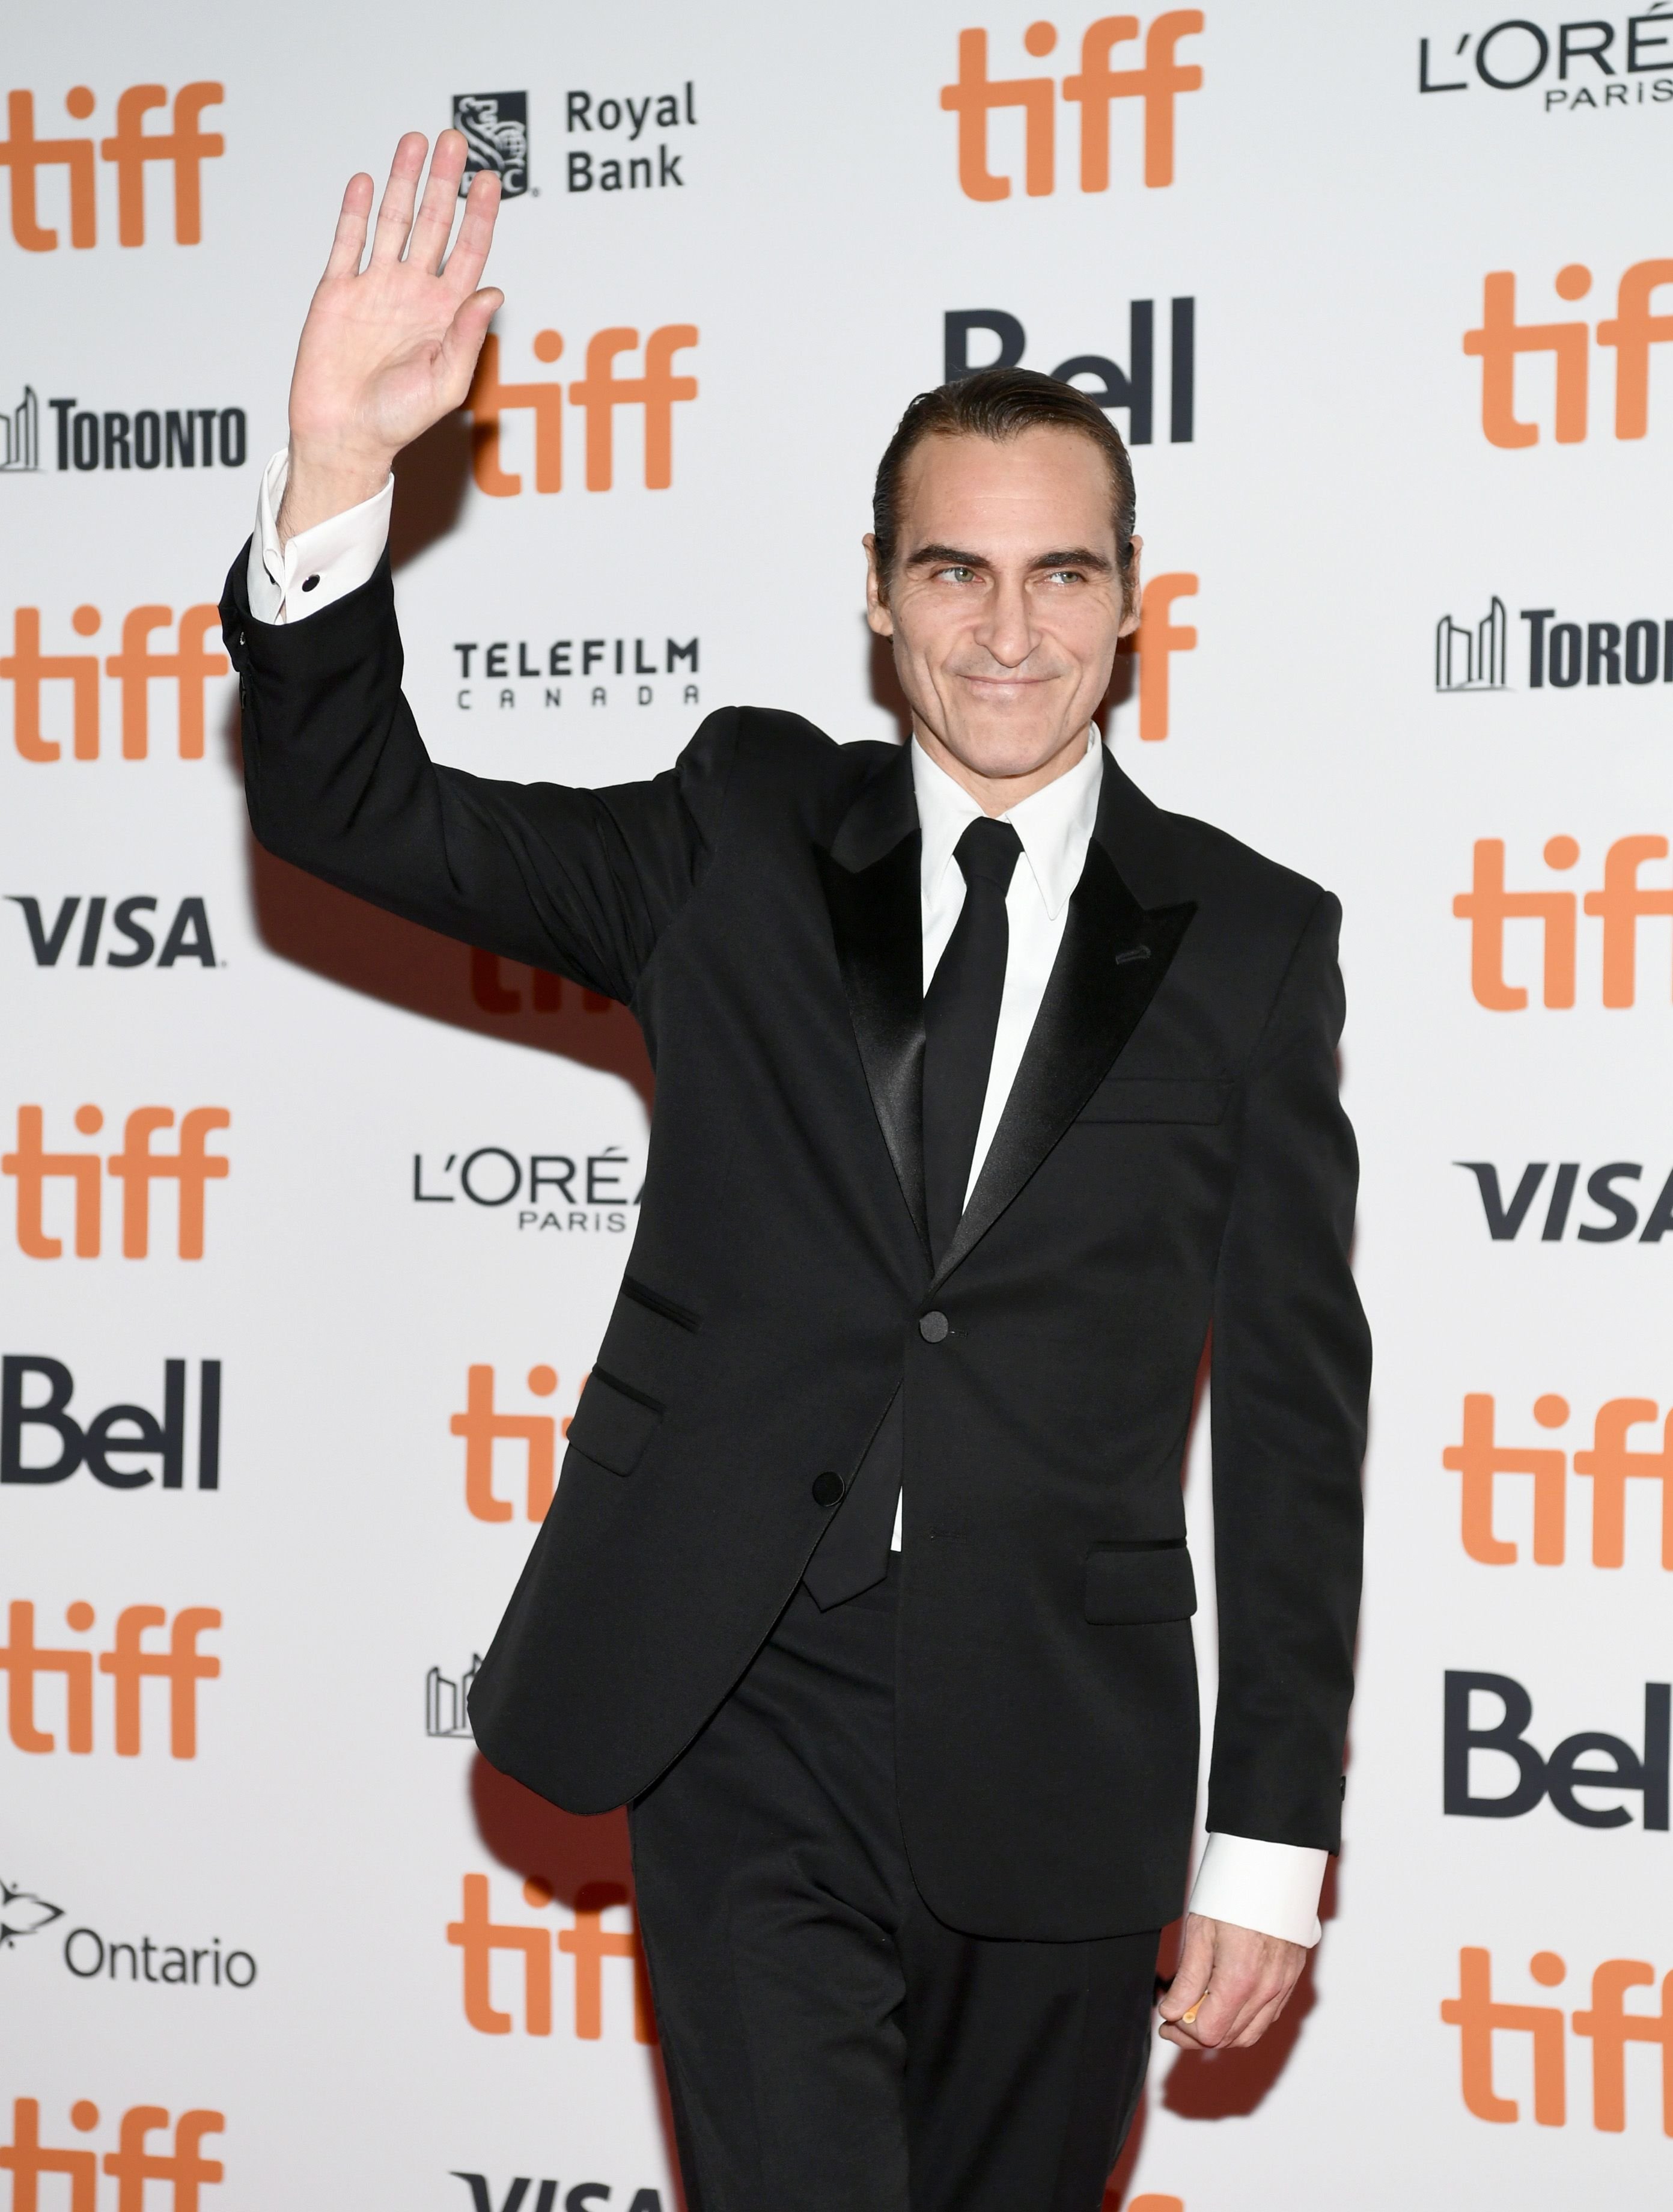 Joaquin Phoenix during the "The Sisters Brothers" premiere during 2018 Toronto International Film Festival at Princess of Wales Theatre on September 8, 2018 in Toronto, Canada. | Source: Getty Images